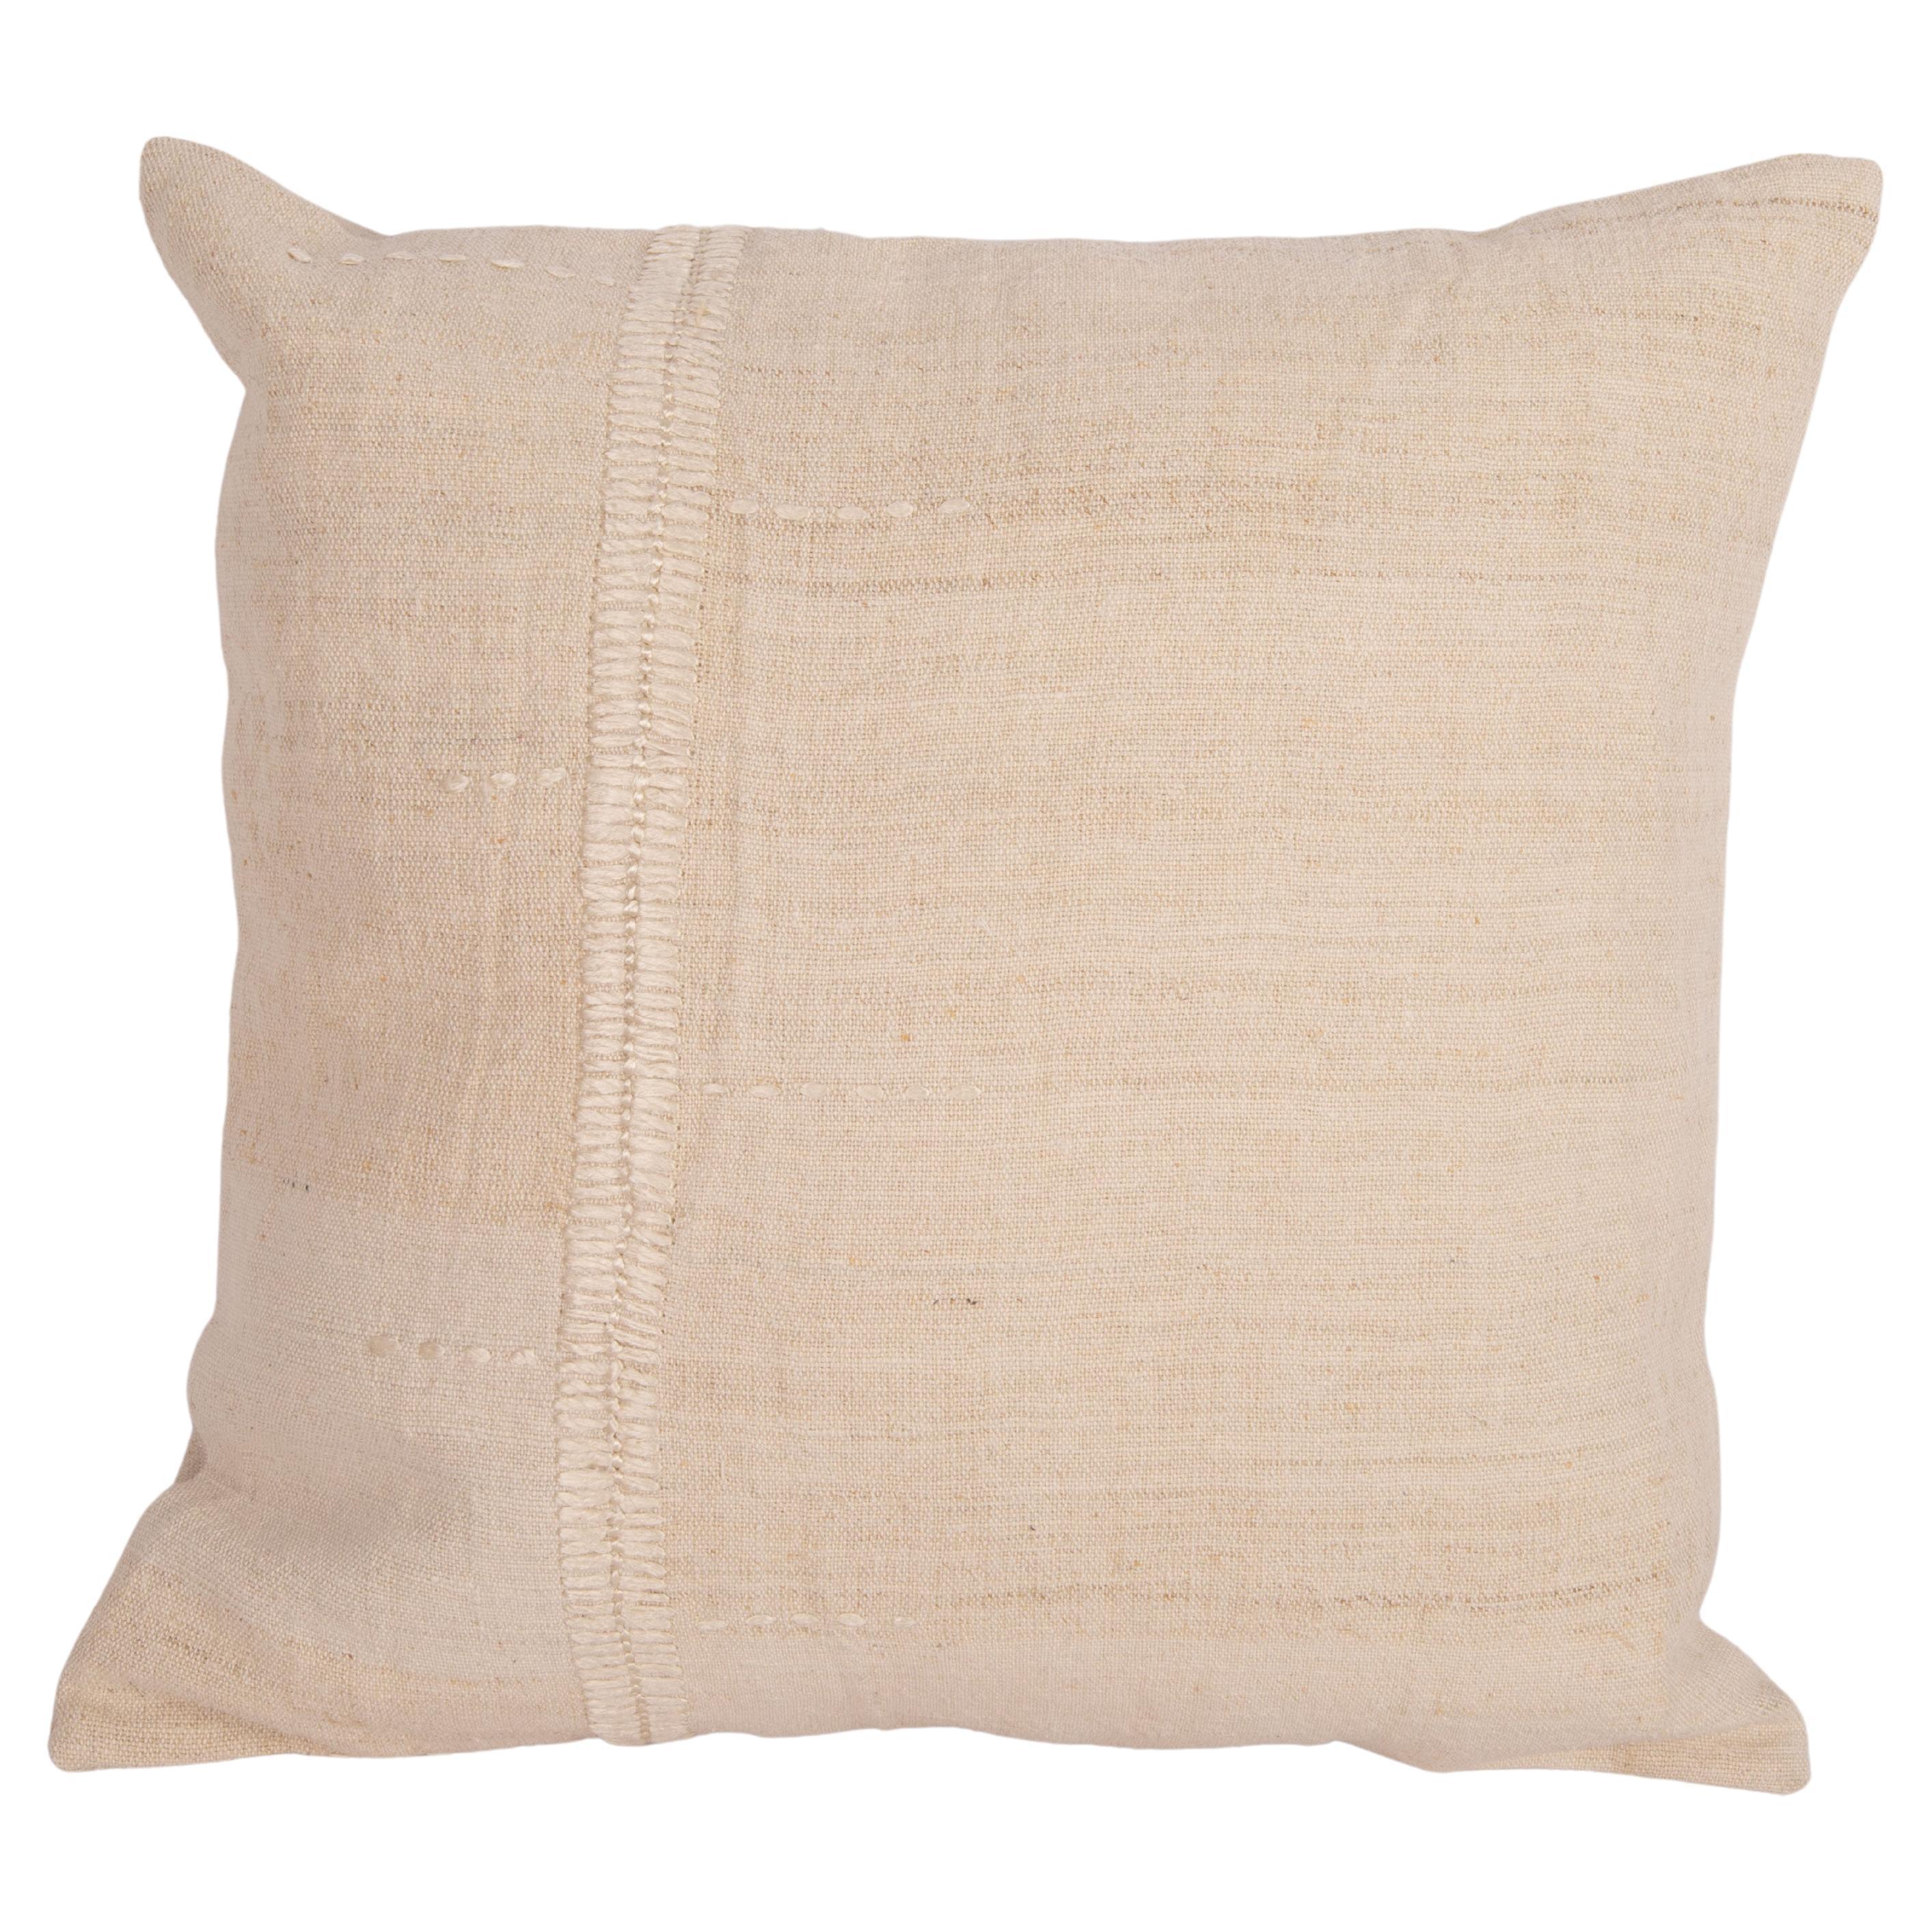 Rustic Pillow Case Made from a Vintage Anatolian Linen Fabric Mid 20th C.